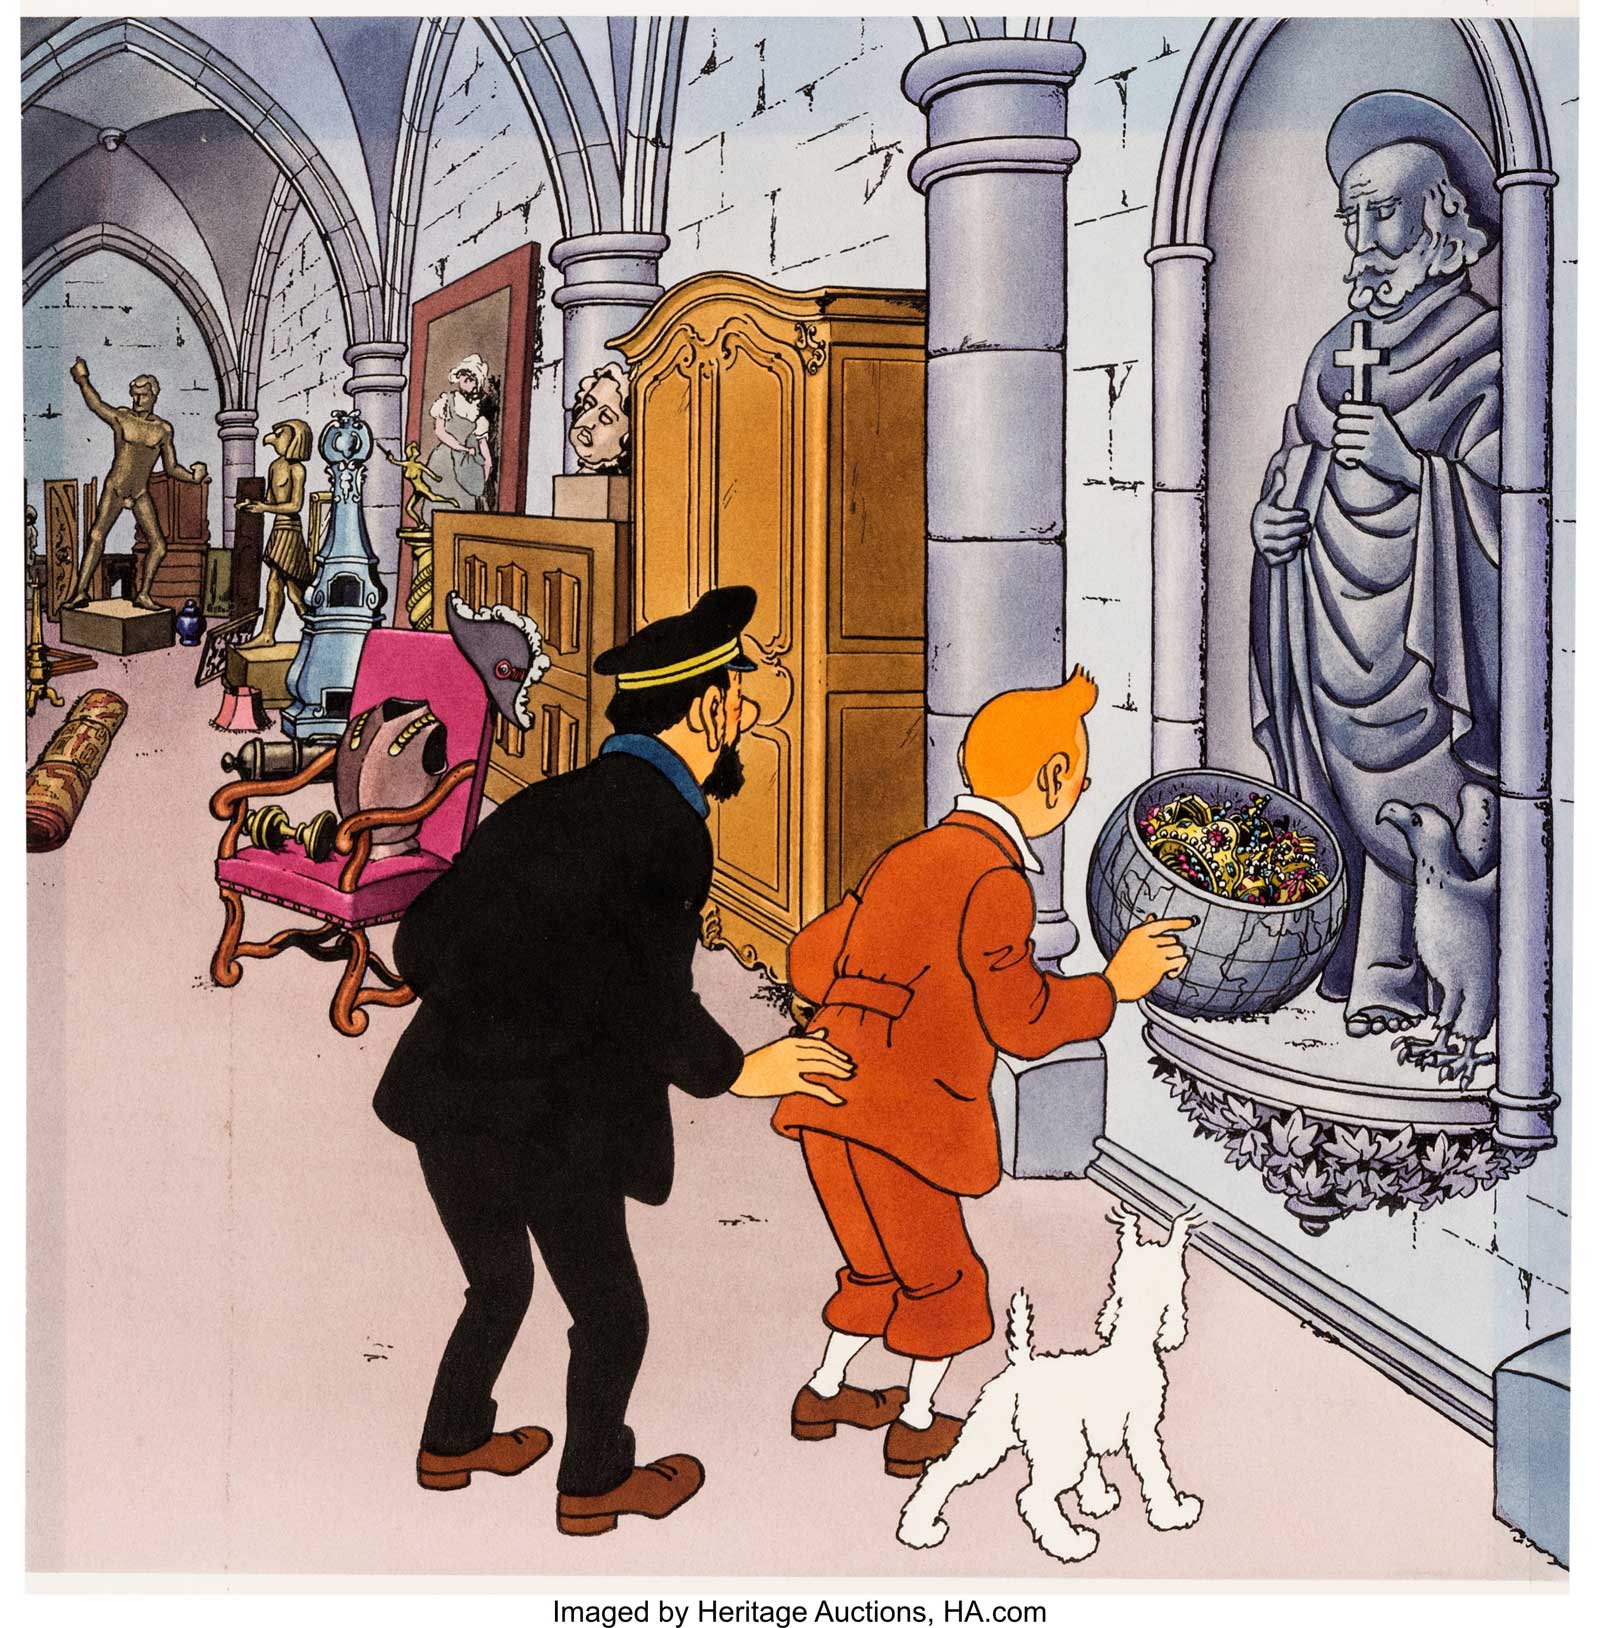 Hergé (Georges Rémi) Red Rackham's Treasure: The Crypt of Marlinspike Hall Original Art (Hallmark, 1970). Along with the cover, this is the most beautiful illustration from the pop-up book of Red Rackham's Treasure.